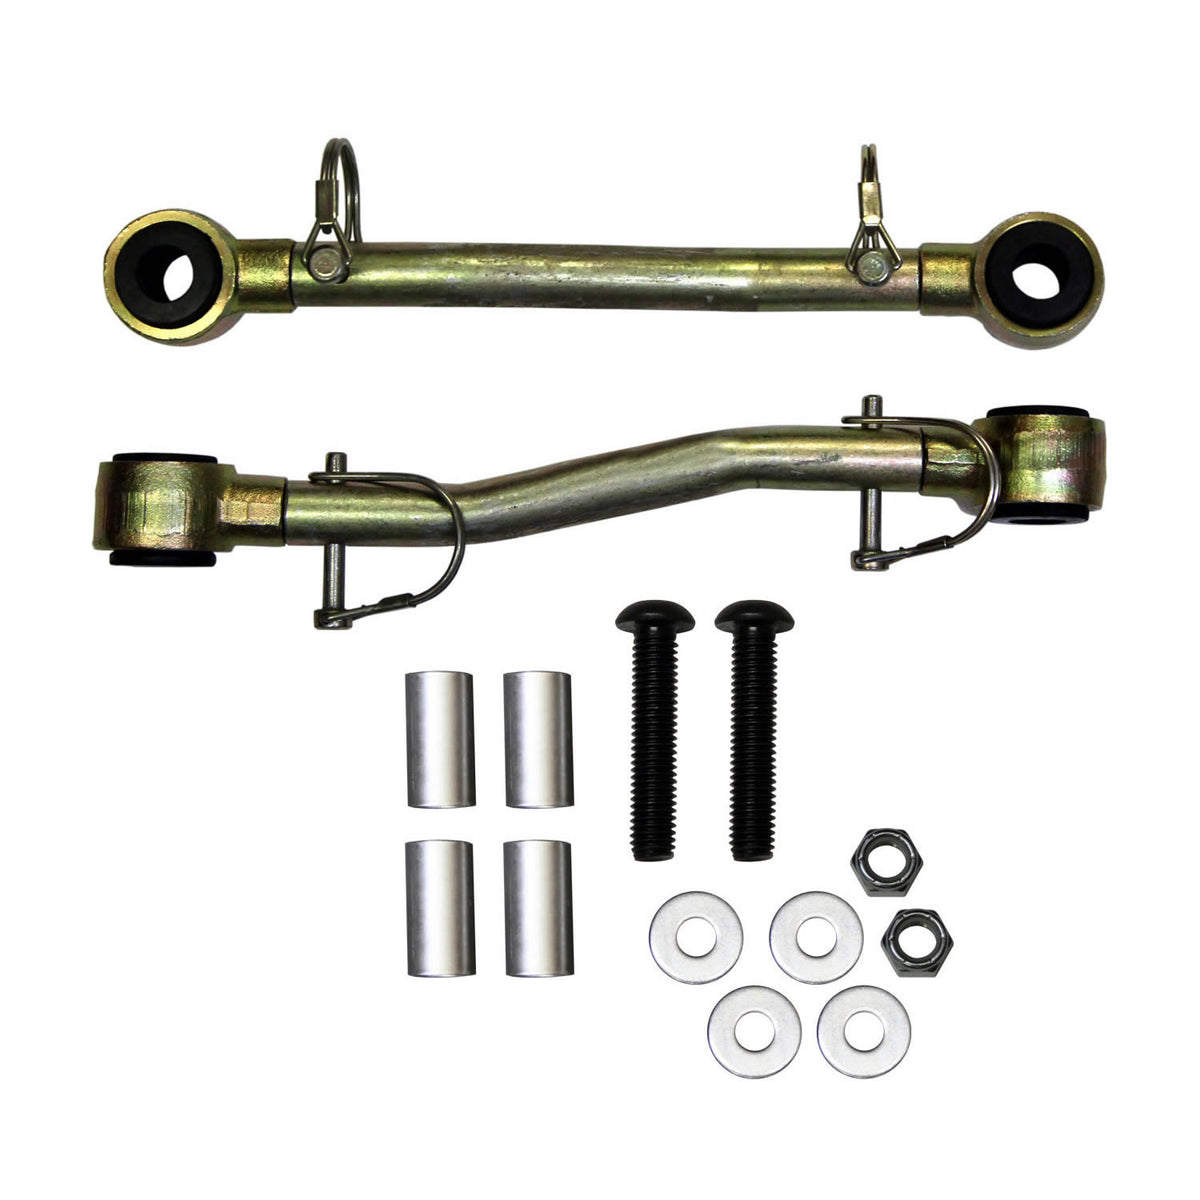 Sway Bar Extended End Links Disconnect Front Lift Height 2-5 Inch Double Black Rubber Bushings 07-18 Wrangler JK Skyjacker